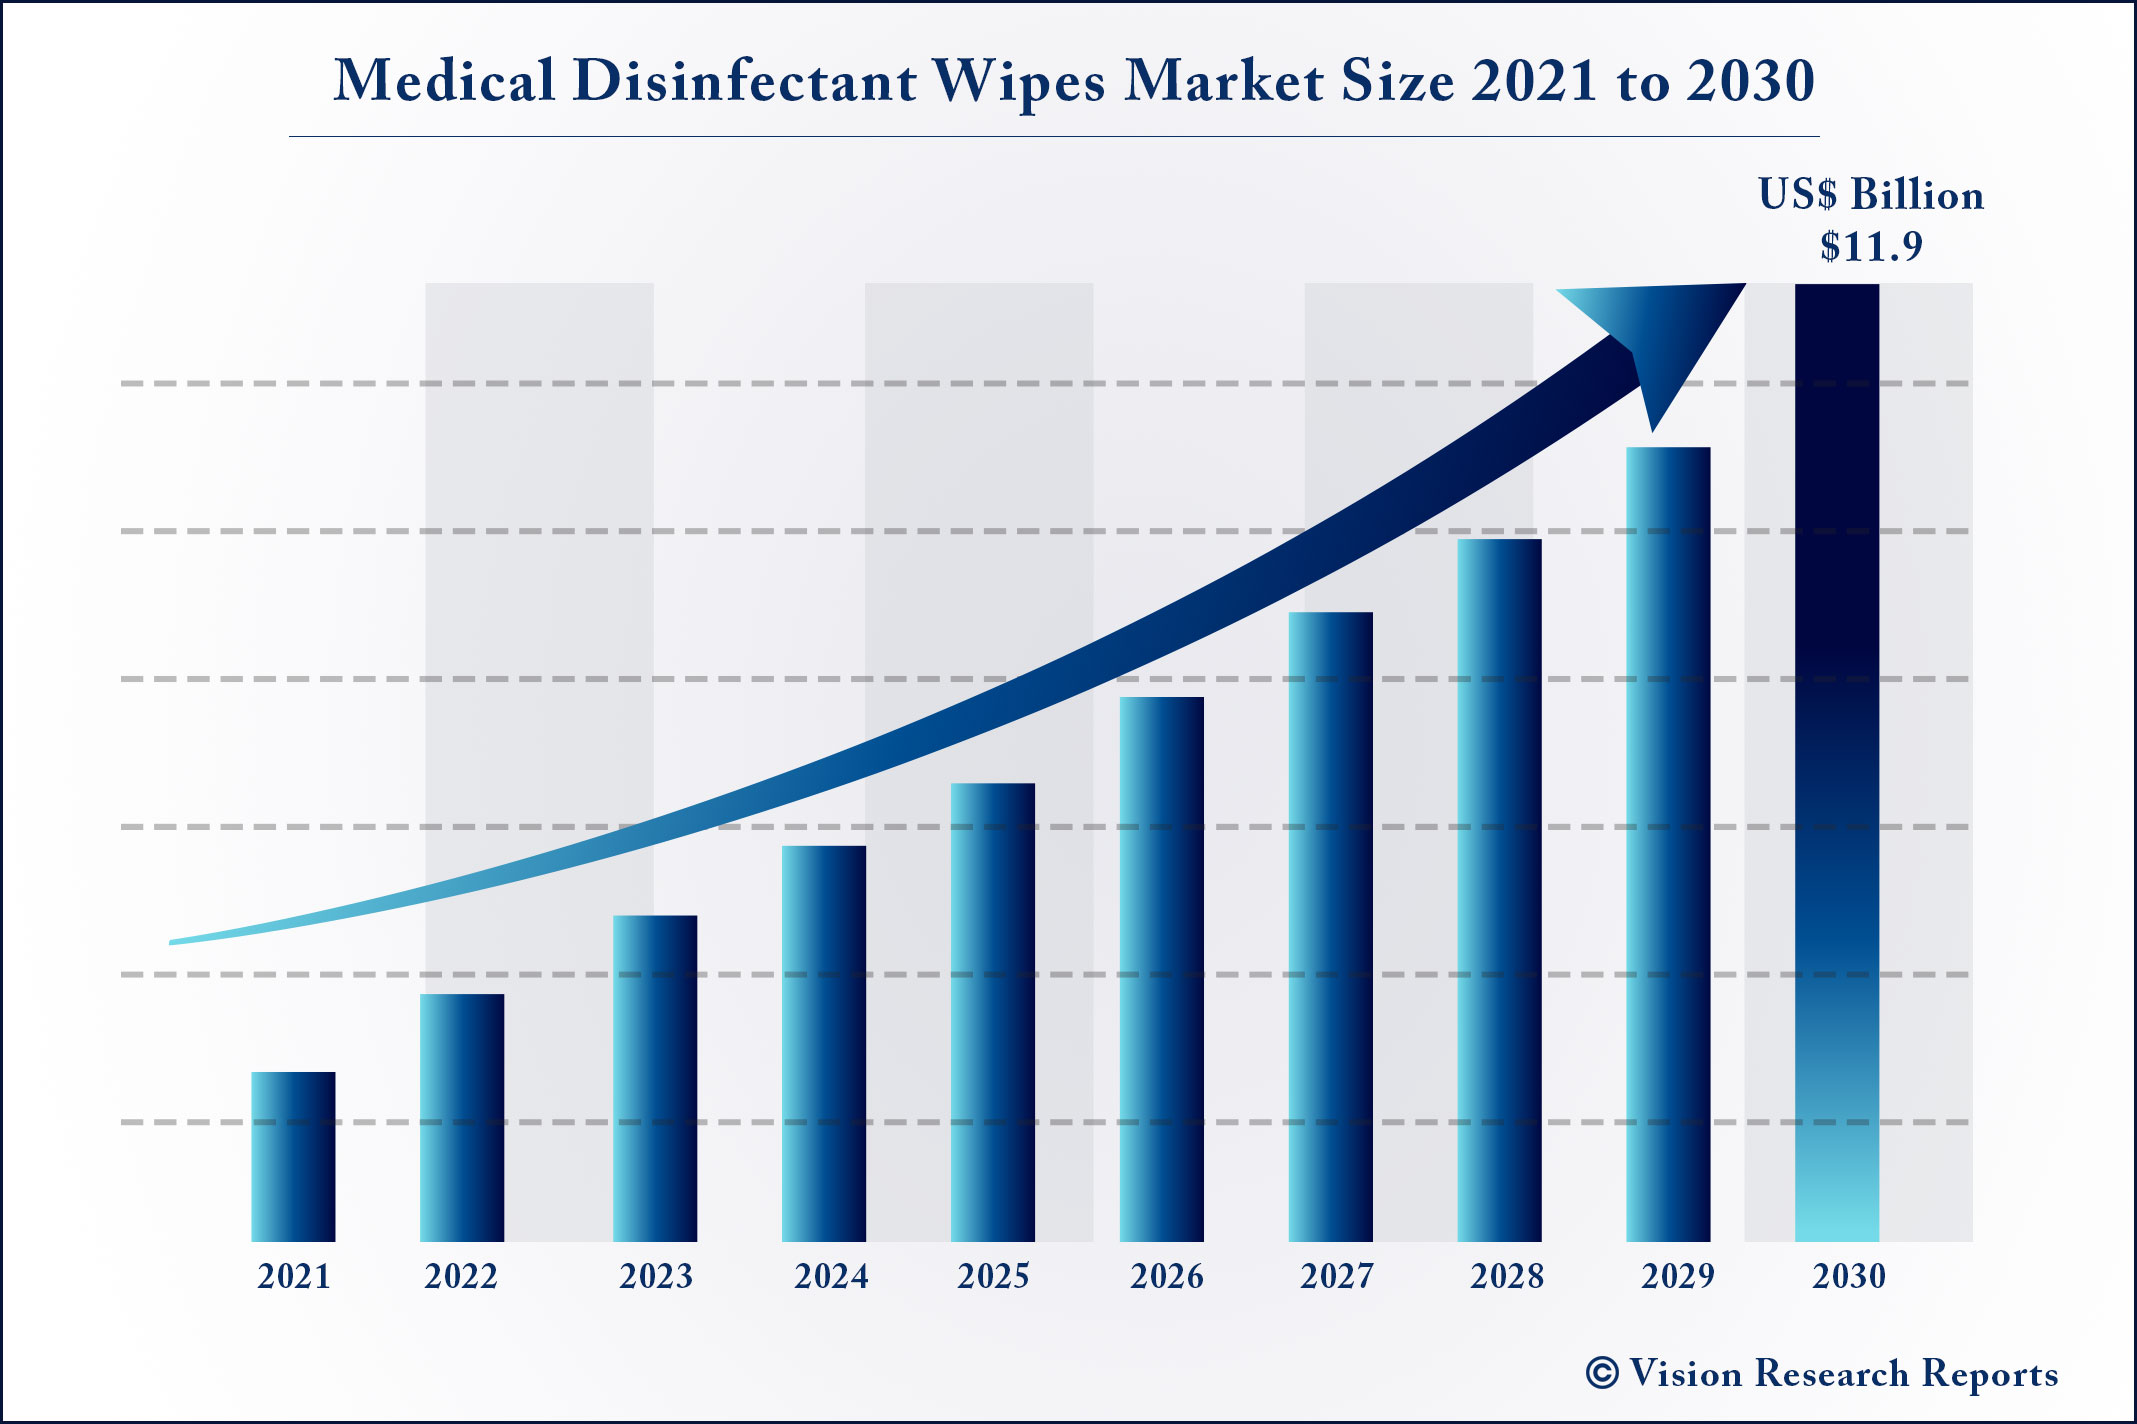 Medical Disinfectant Wipes Market Size 2021 to 2030